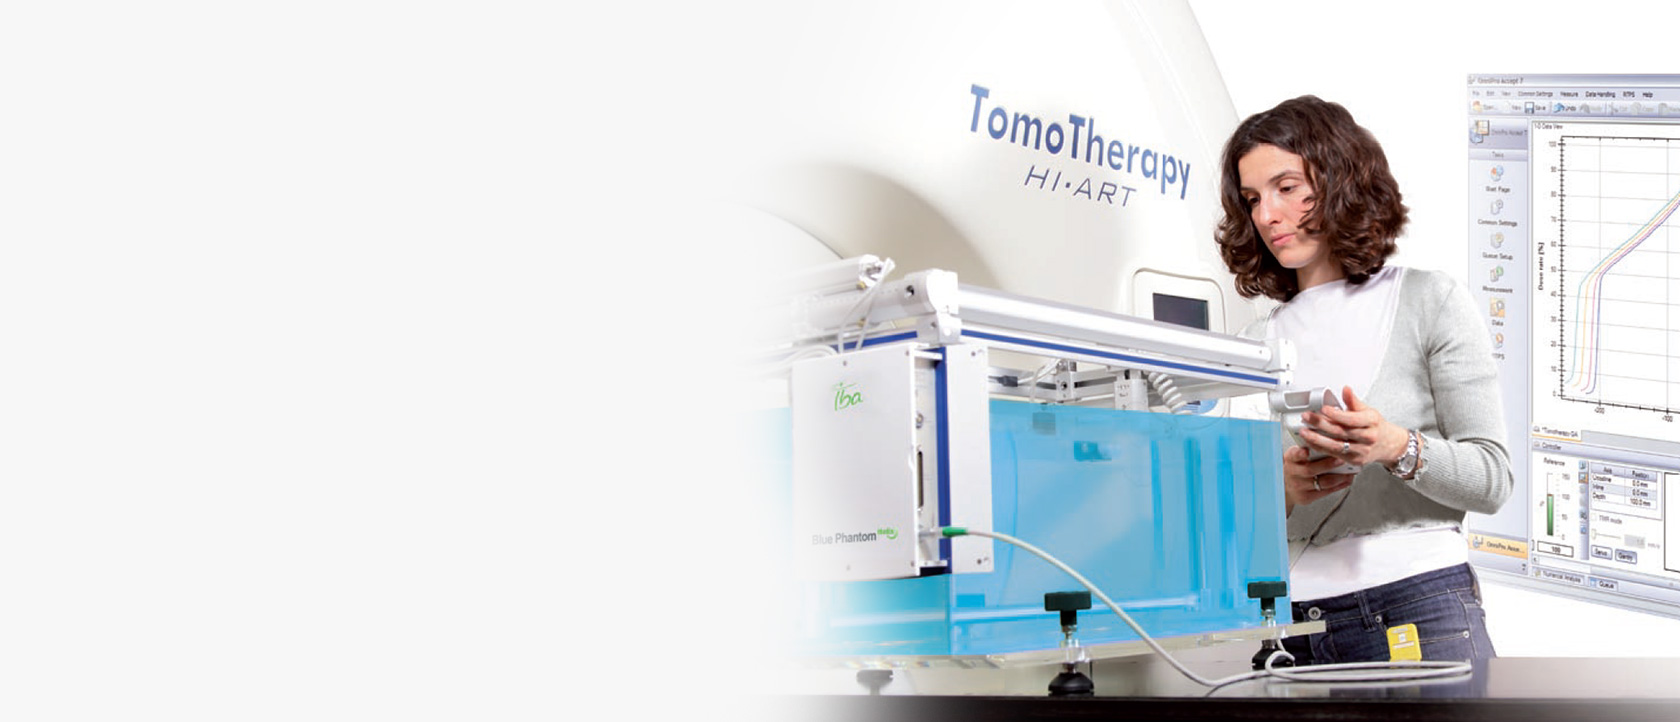 IBA Dosimetry Solutions for Tomotherapy